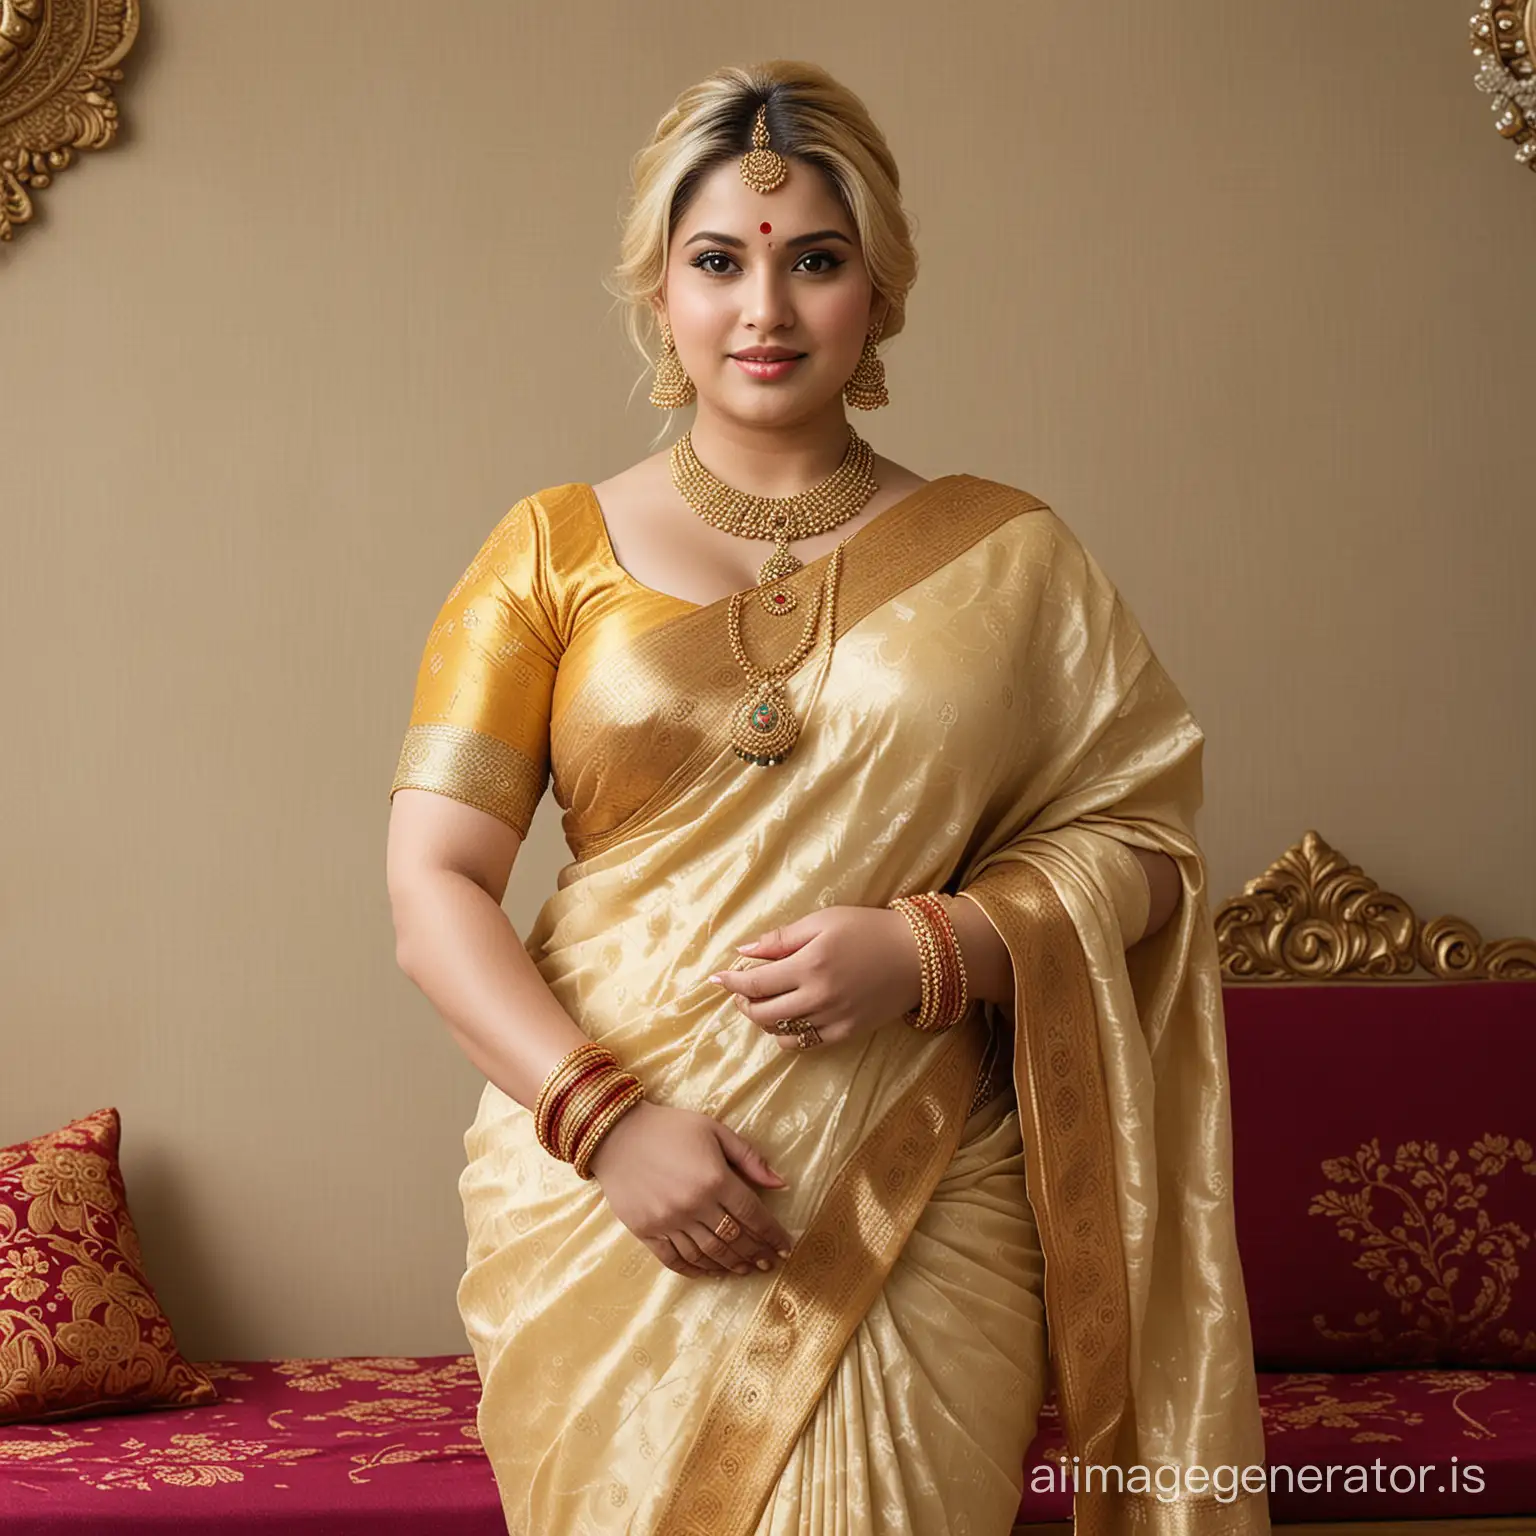 Generate full body image of a 26 year old very busty fatty breast, big fatty thighs, big fatty hand arm, big fatty ass and curvy completely American origin mature fatty chubby obese very fair white skin girl blonde hair wearing traditional style banarasi saree and wearing bangles in hand and wearing gold necklace with gold jewelry in india wedding program